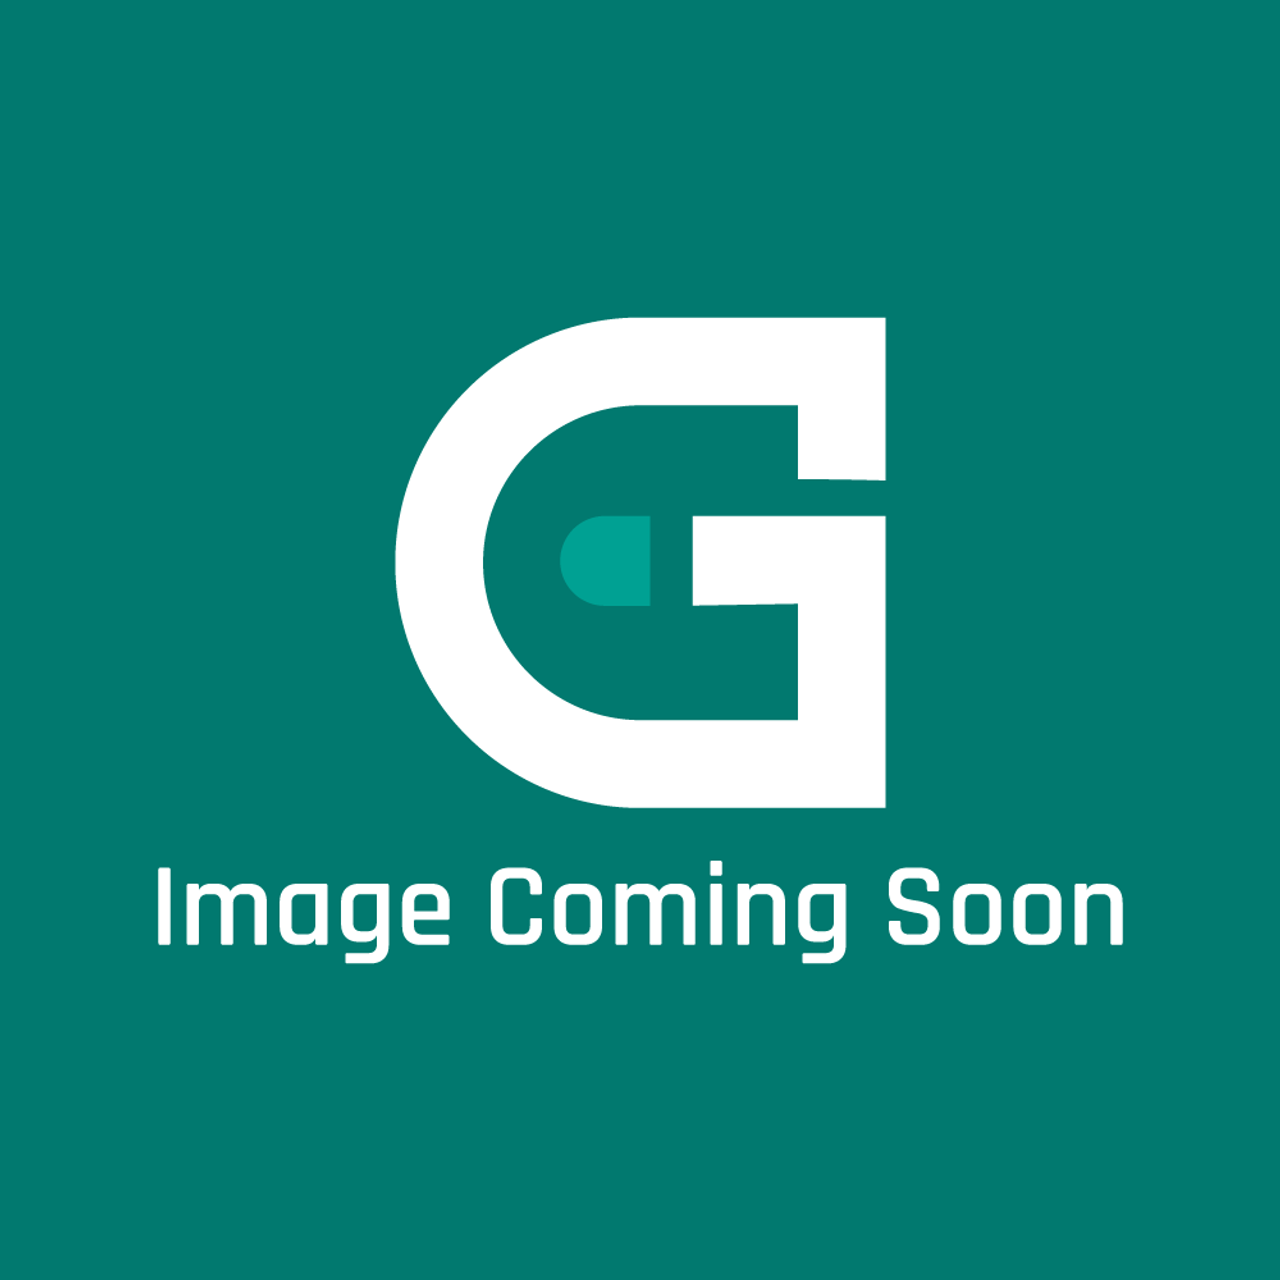 Frigidaire - Electrolux 117495190 Outer Door - Image Coming Soon!